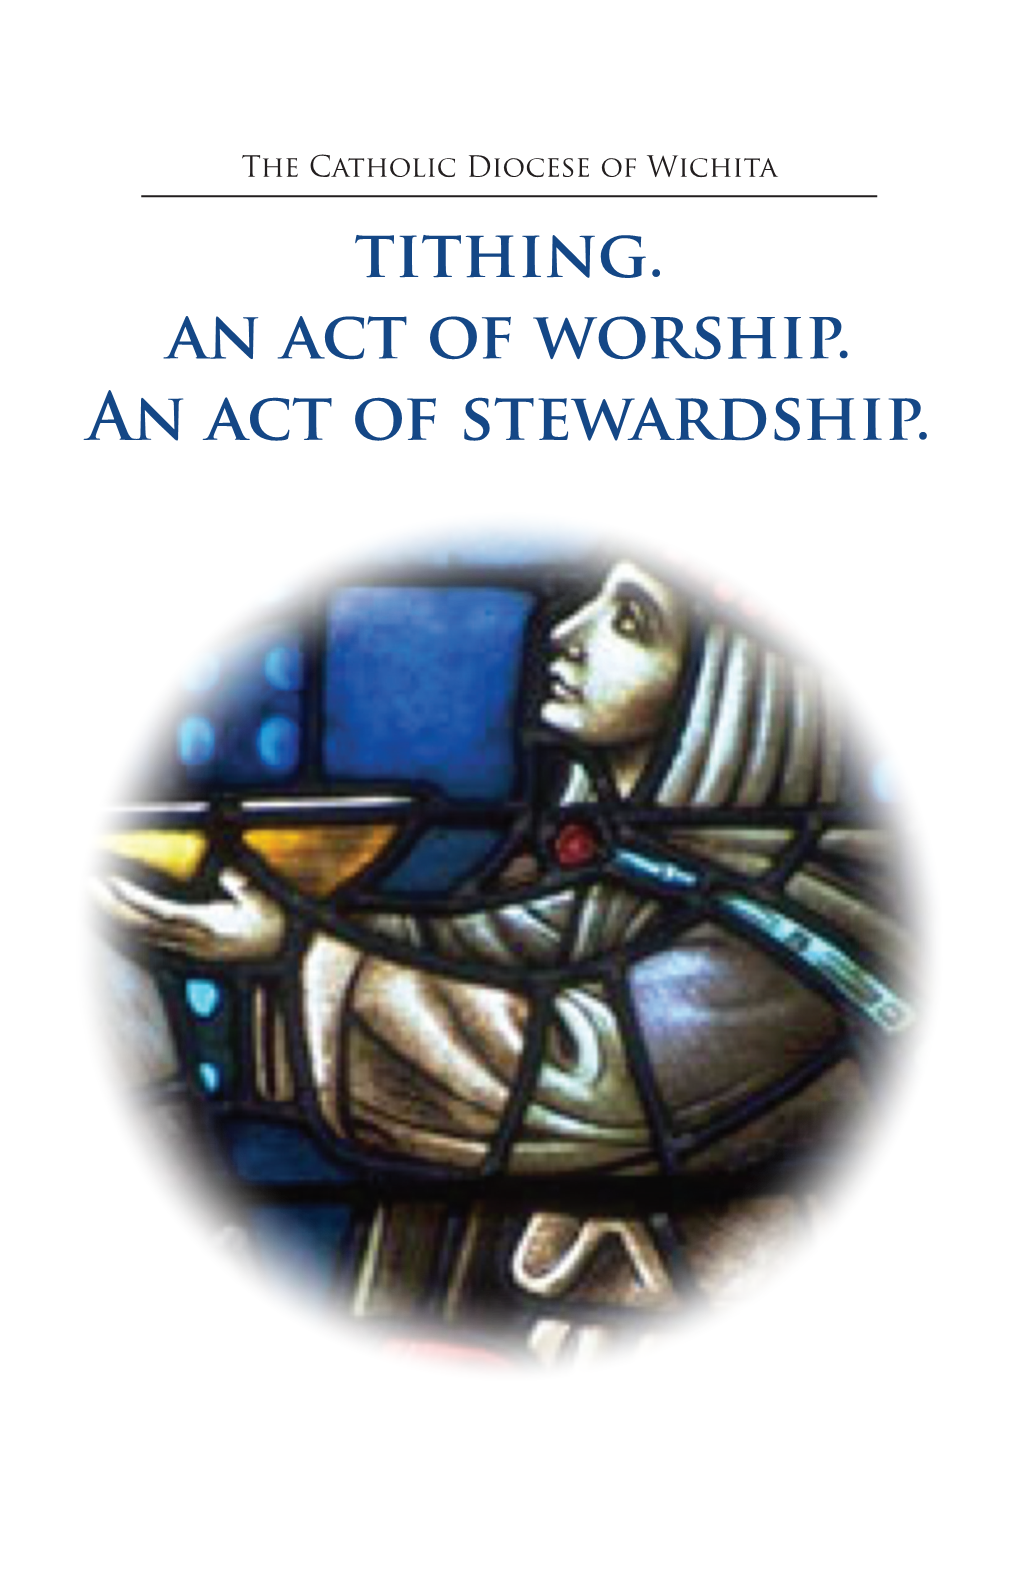 Tithing an Act of Stewardship an Act of Worship